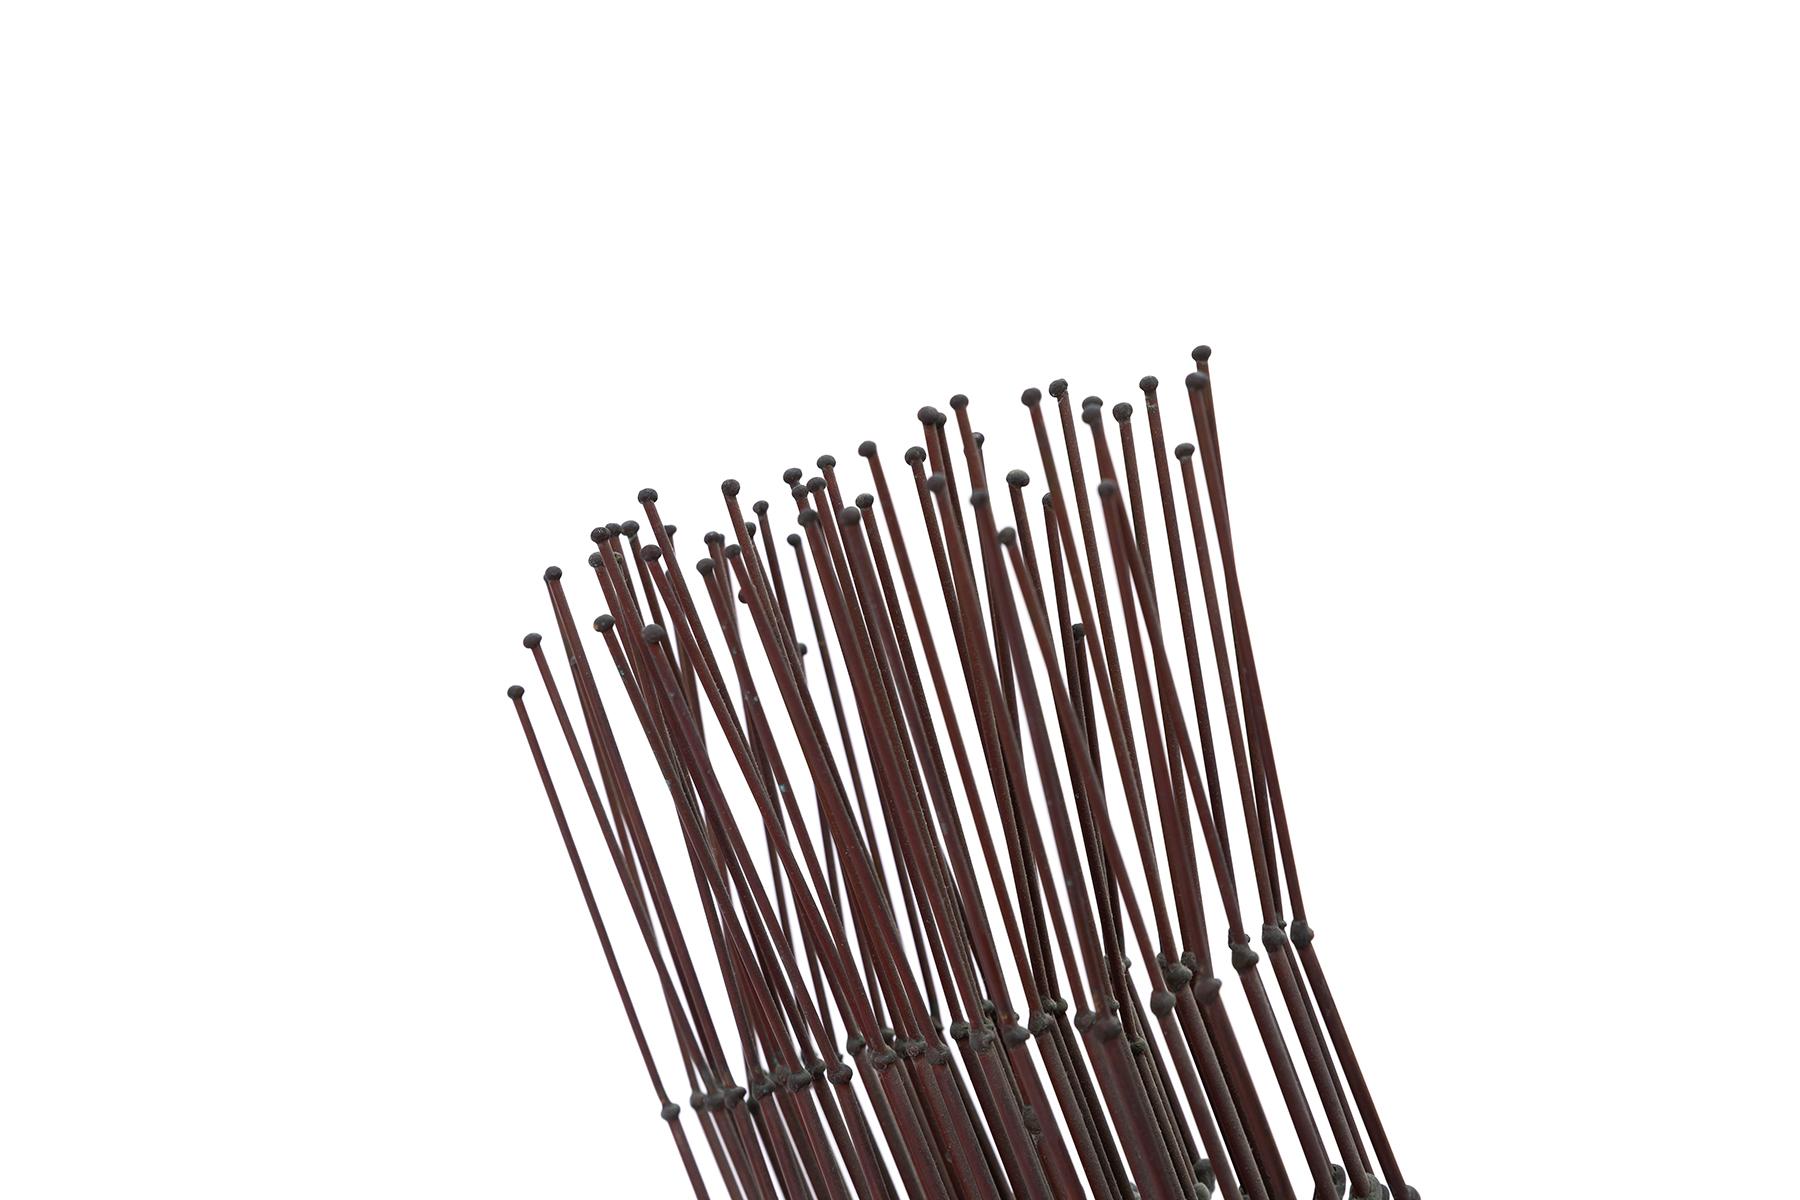 Harry Bertoia Phosphor bronze sculpture with applied patina from 1965. Wonderful early example that is masterful from every angle. Please see our other listings for two other works by Bertoia.